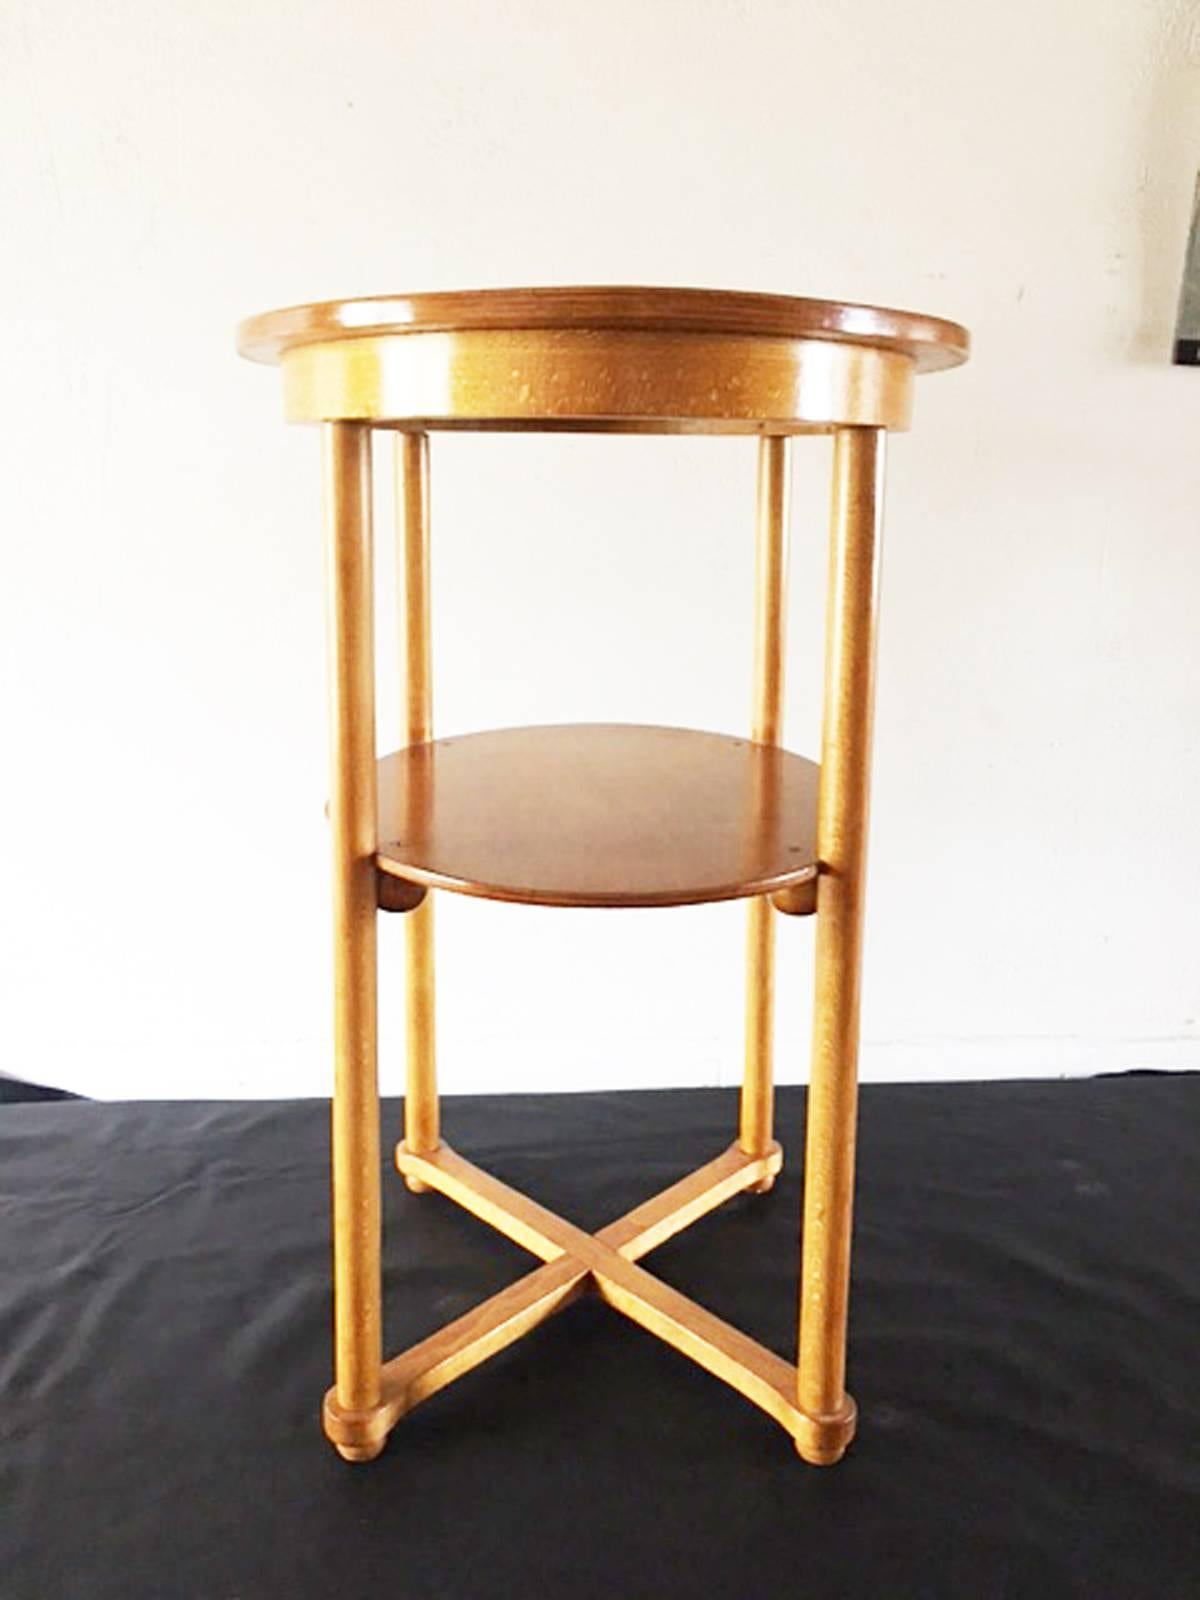 Side table by Josef Hoffmann for Thonet.
Fully restored.